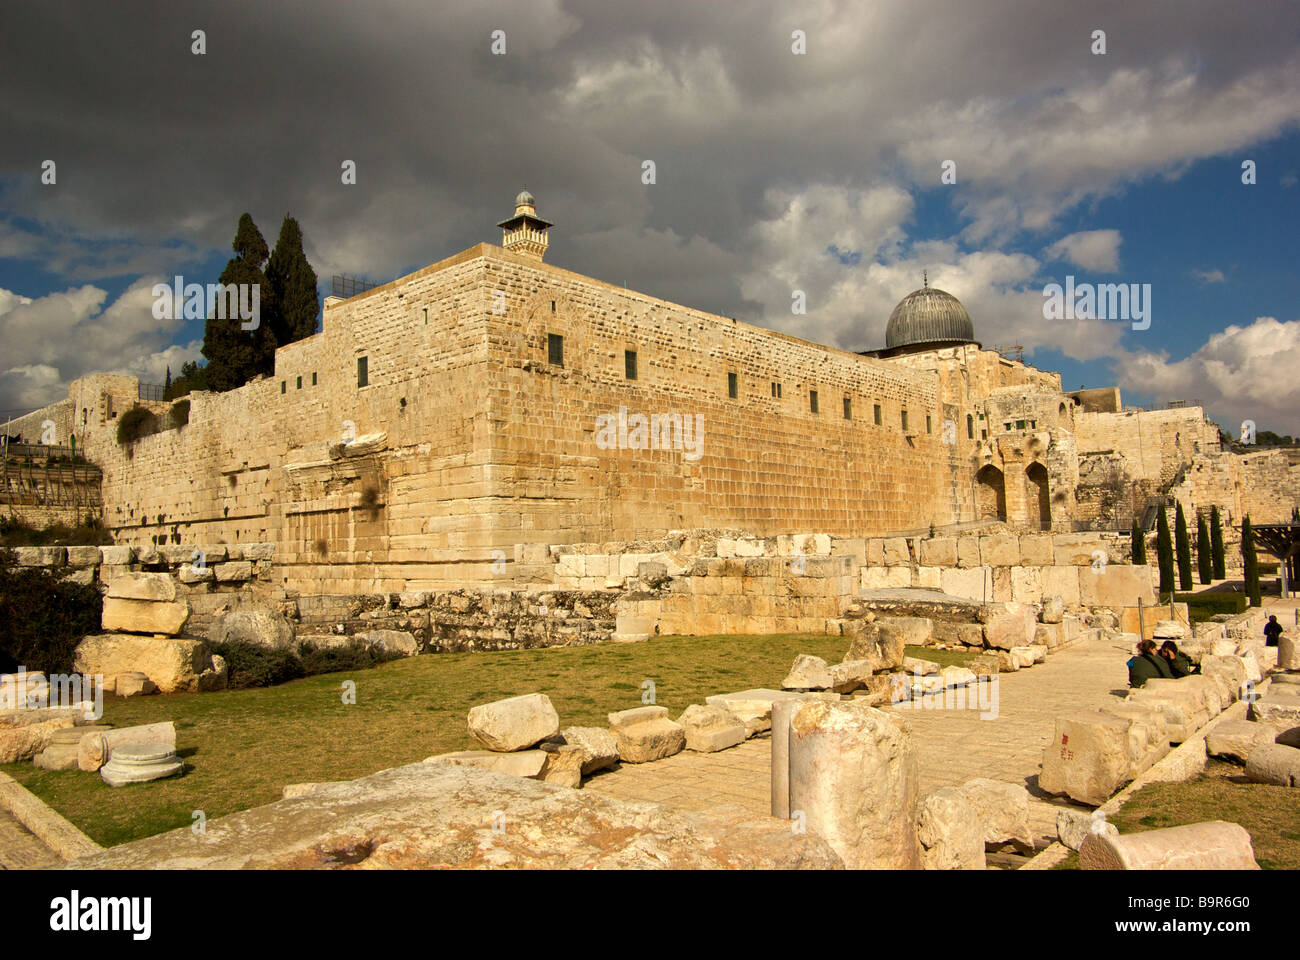 Stone walls fallen columns building remains in Jerusalem Archaeological Park excavation site in old city Stock Photo